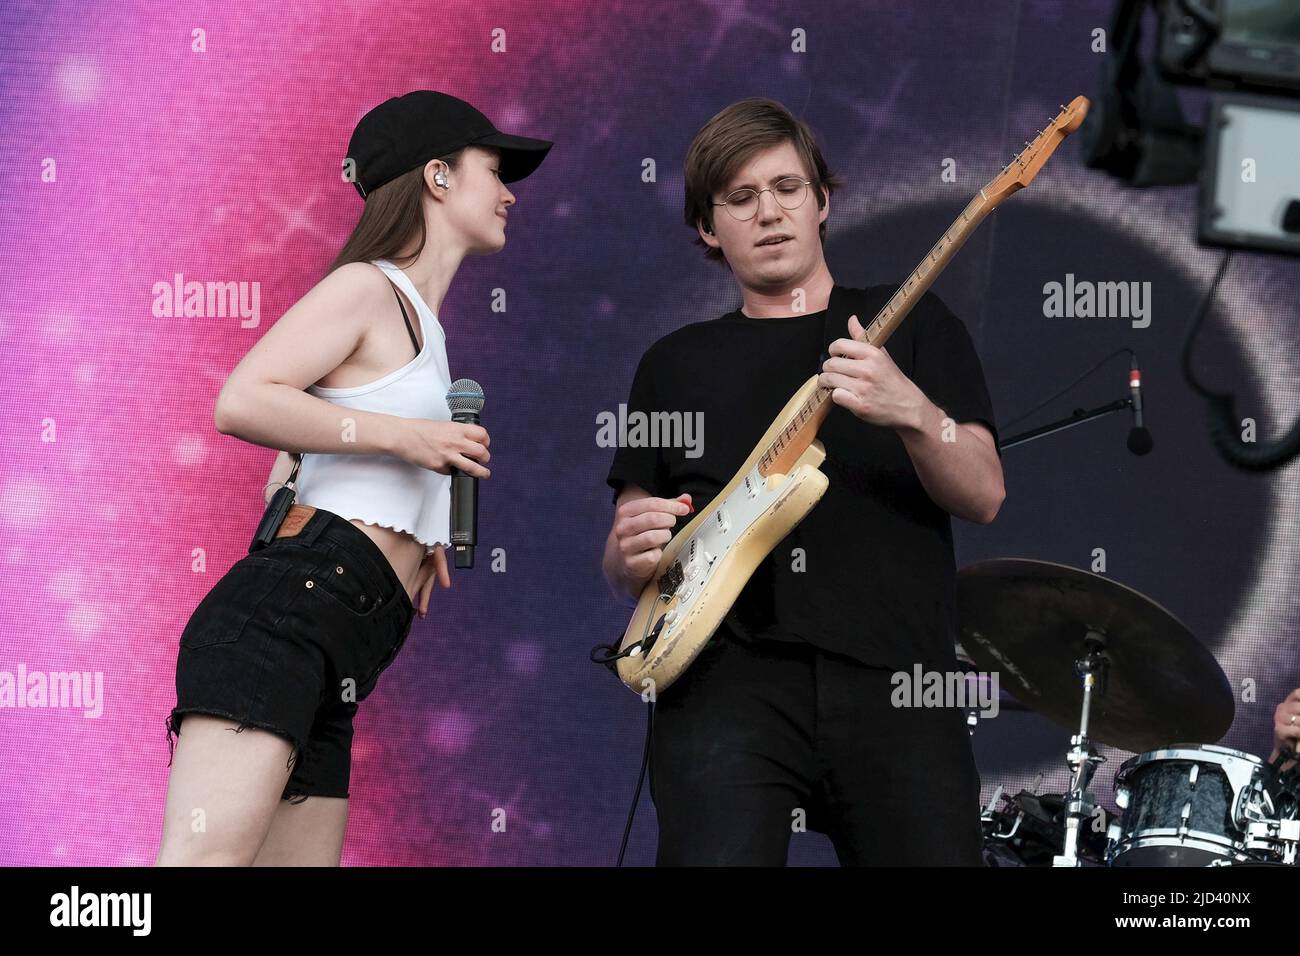 Newport, UK. 17th June, 2022. Norwegian singer songwriter and Scandipop artist Sigrid Solbakk Raabe and guitarist Sondre Berg Abrahamsen perform live on stage at the Isle of Wight Festival (Photo by Dawn Fletcher-Park/SOPA Images/Sipa USA) Credit: Sipa USA/Alamy Live News Stock Photo